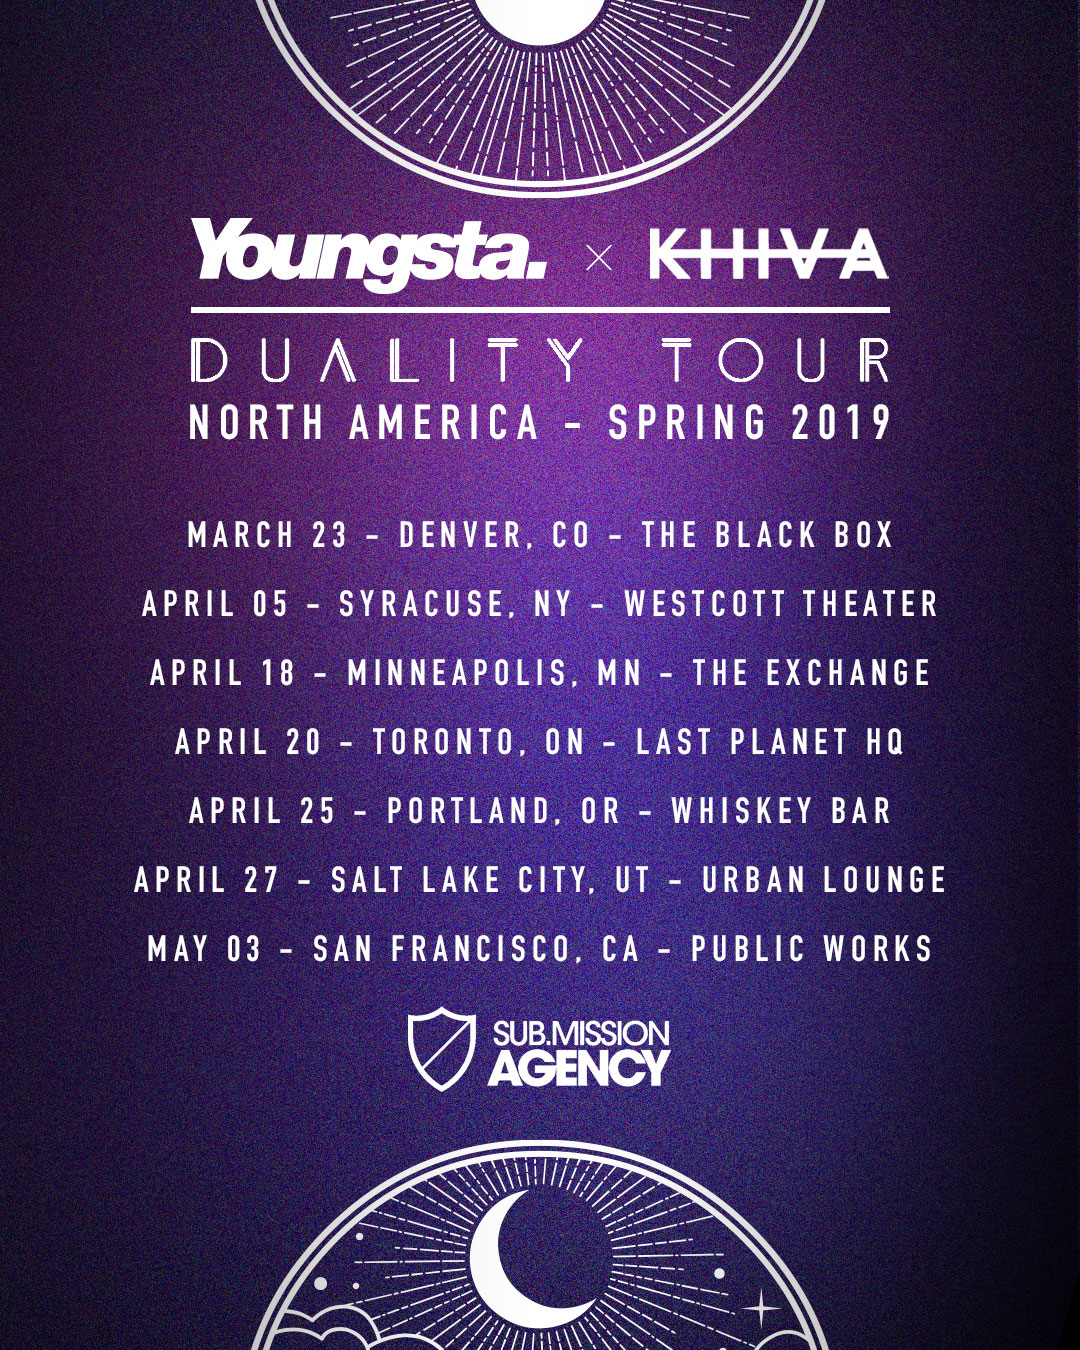 Youngsta x Khiva - Duality Tour